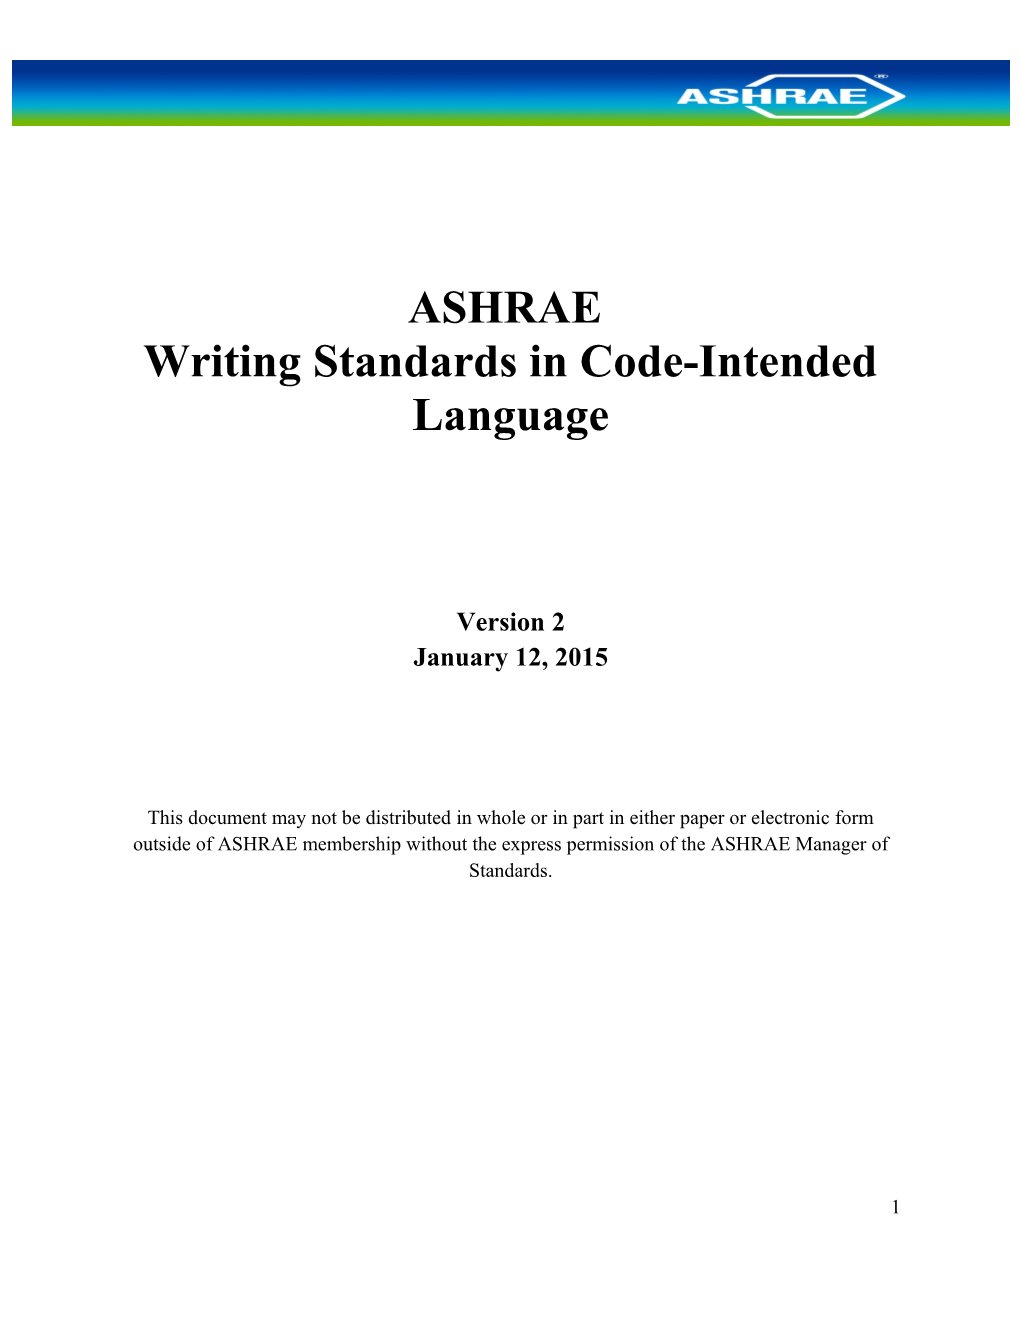 Writing Standards in Code-Intended Language